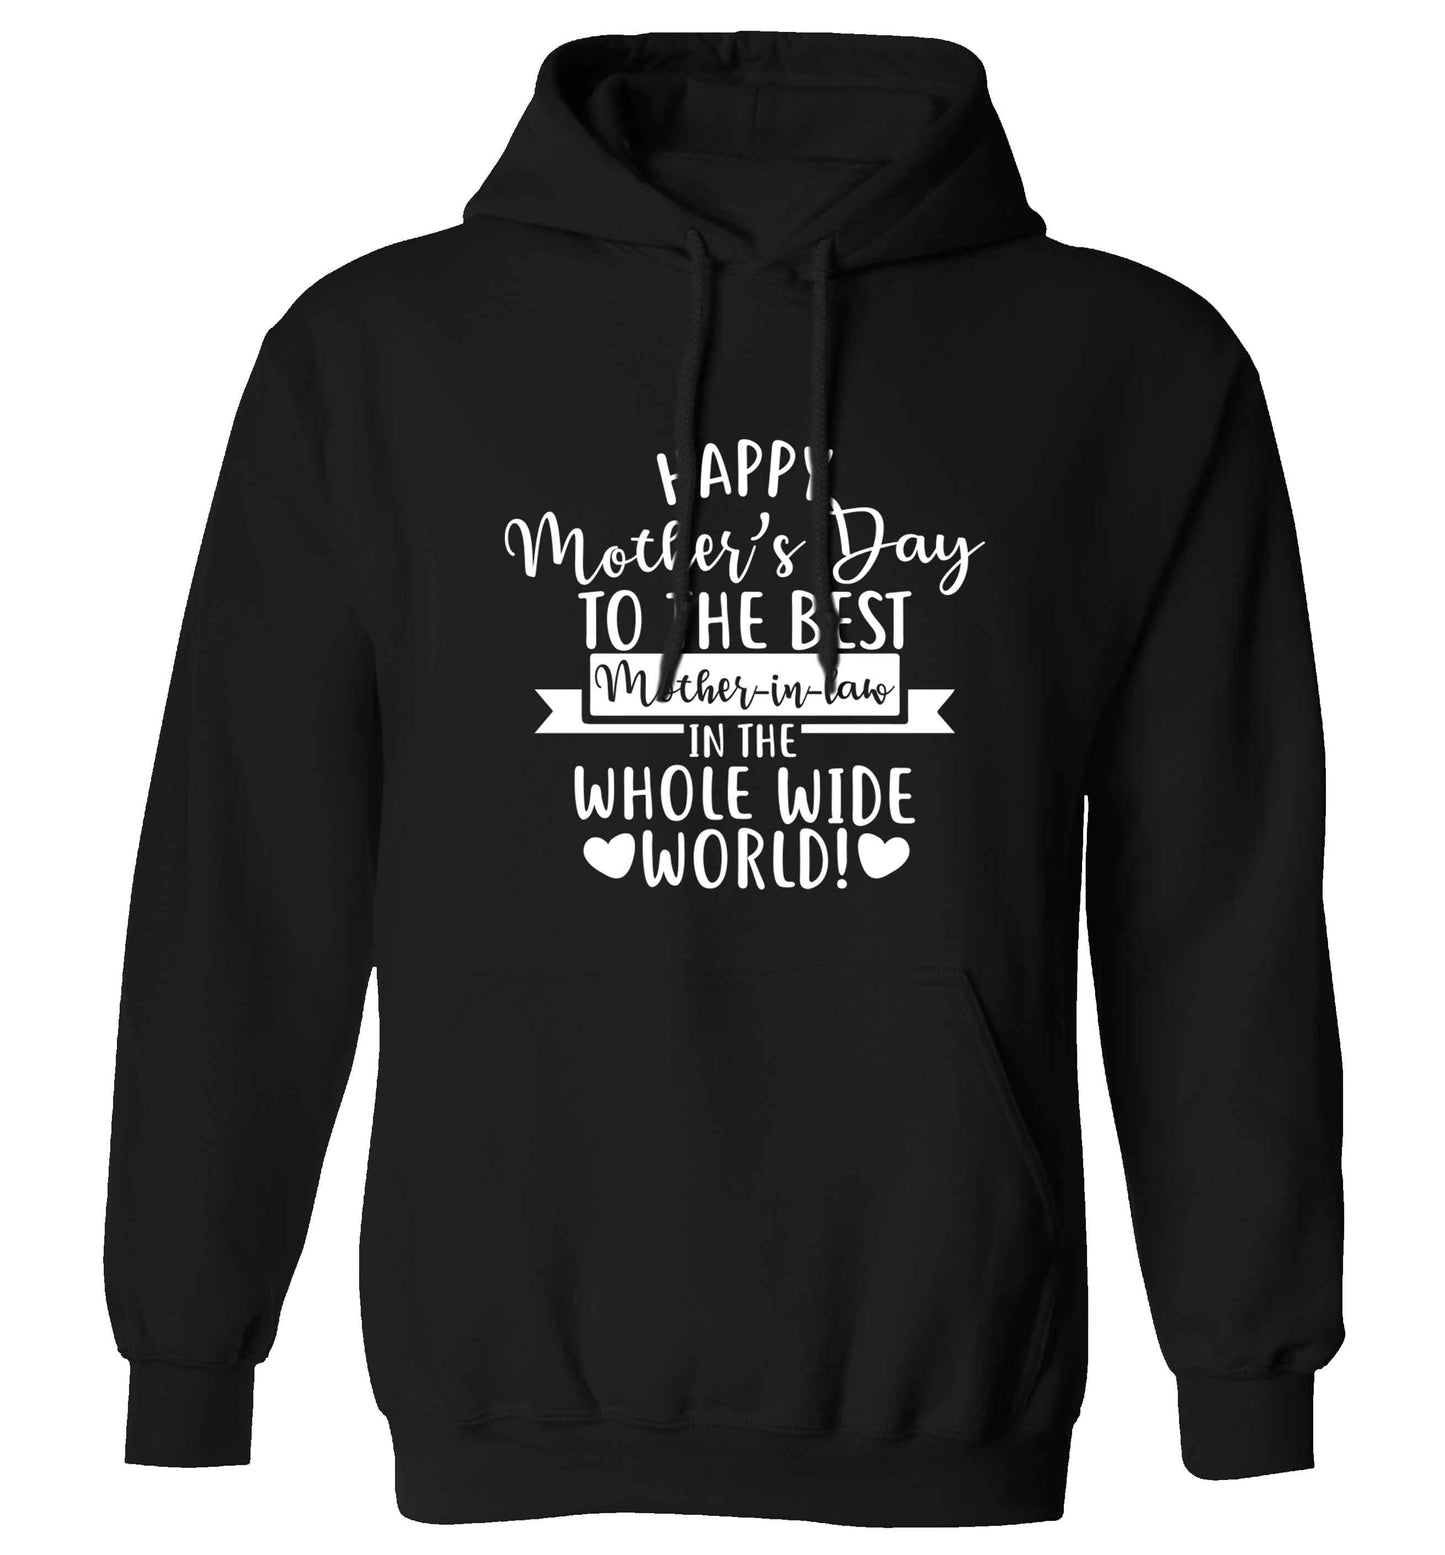 Happy mother's day to the best mother-in law in the world adults unisex black hoodie 2XL